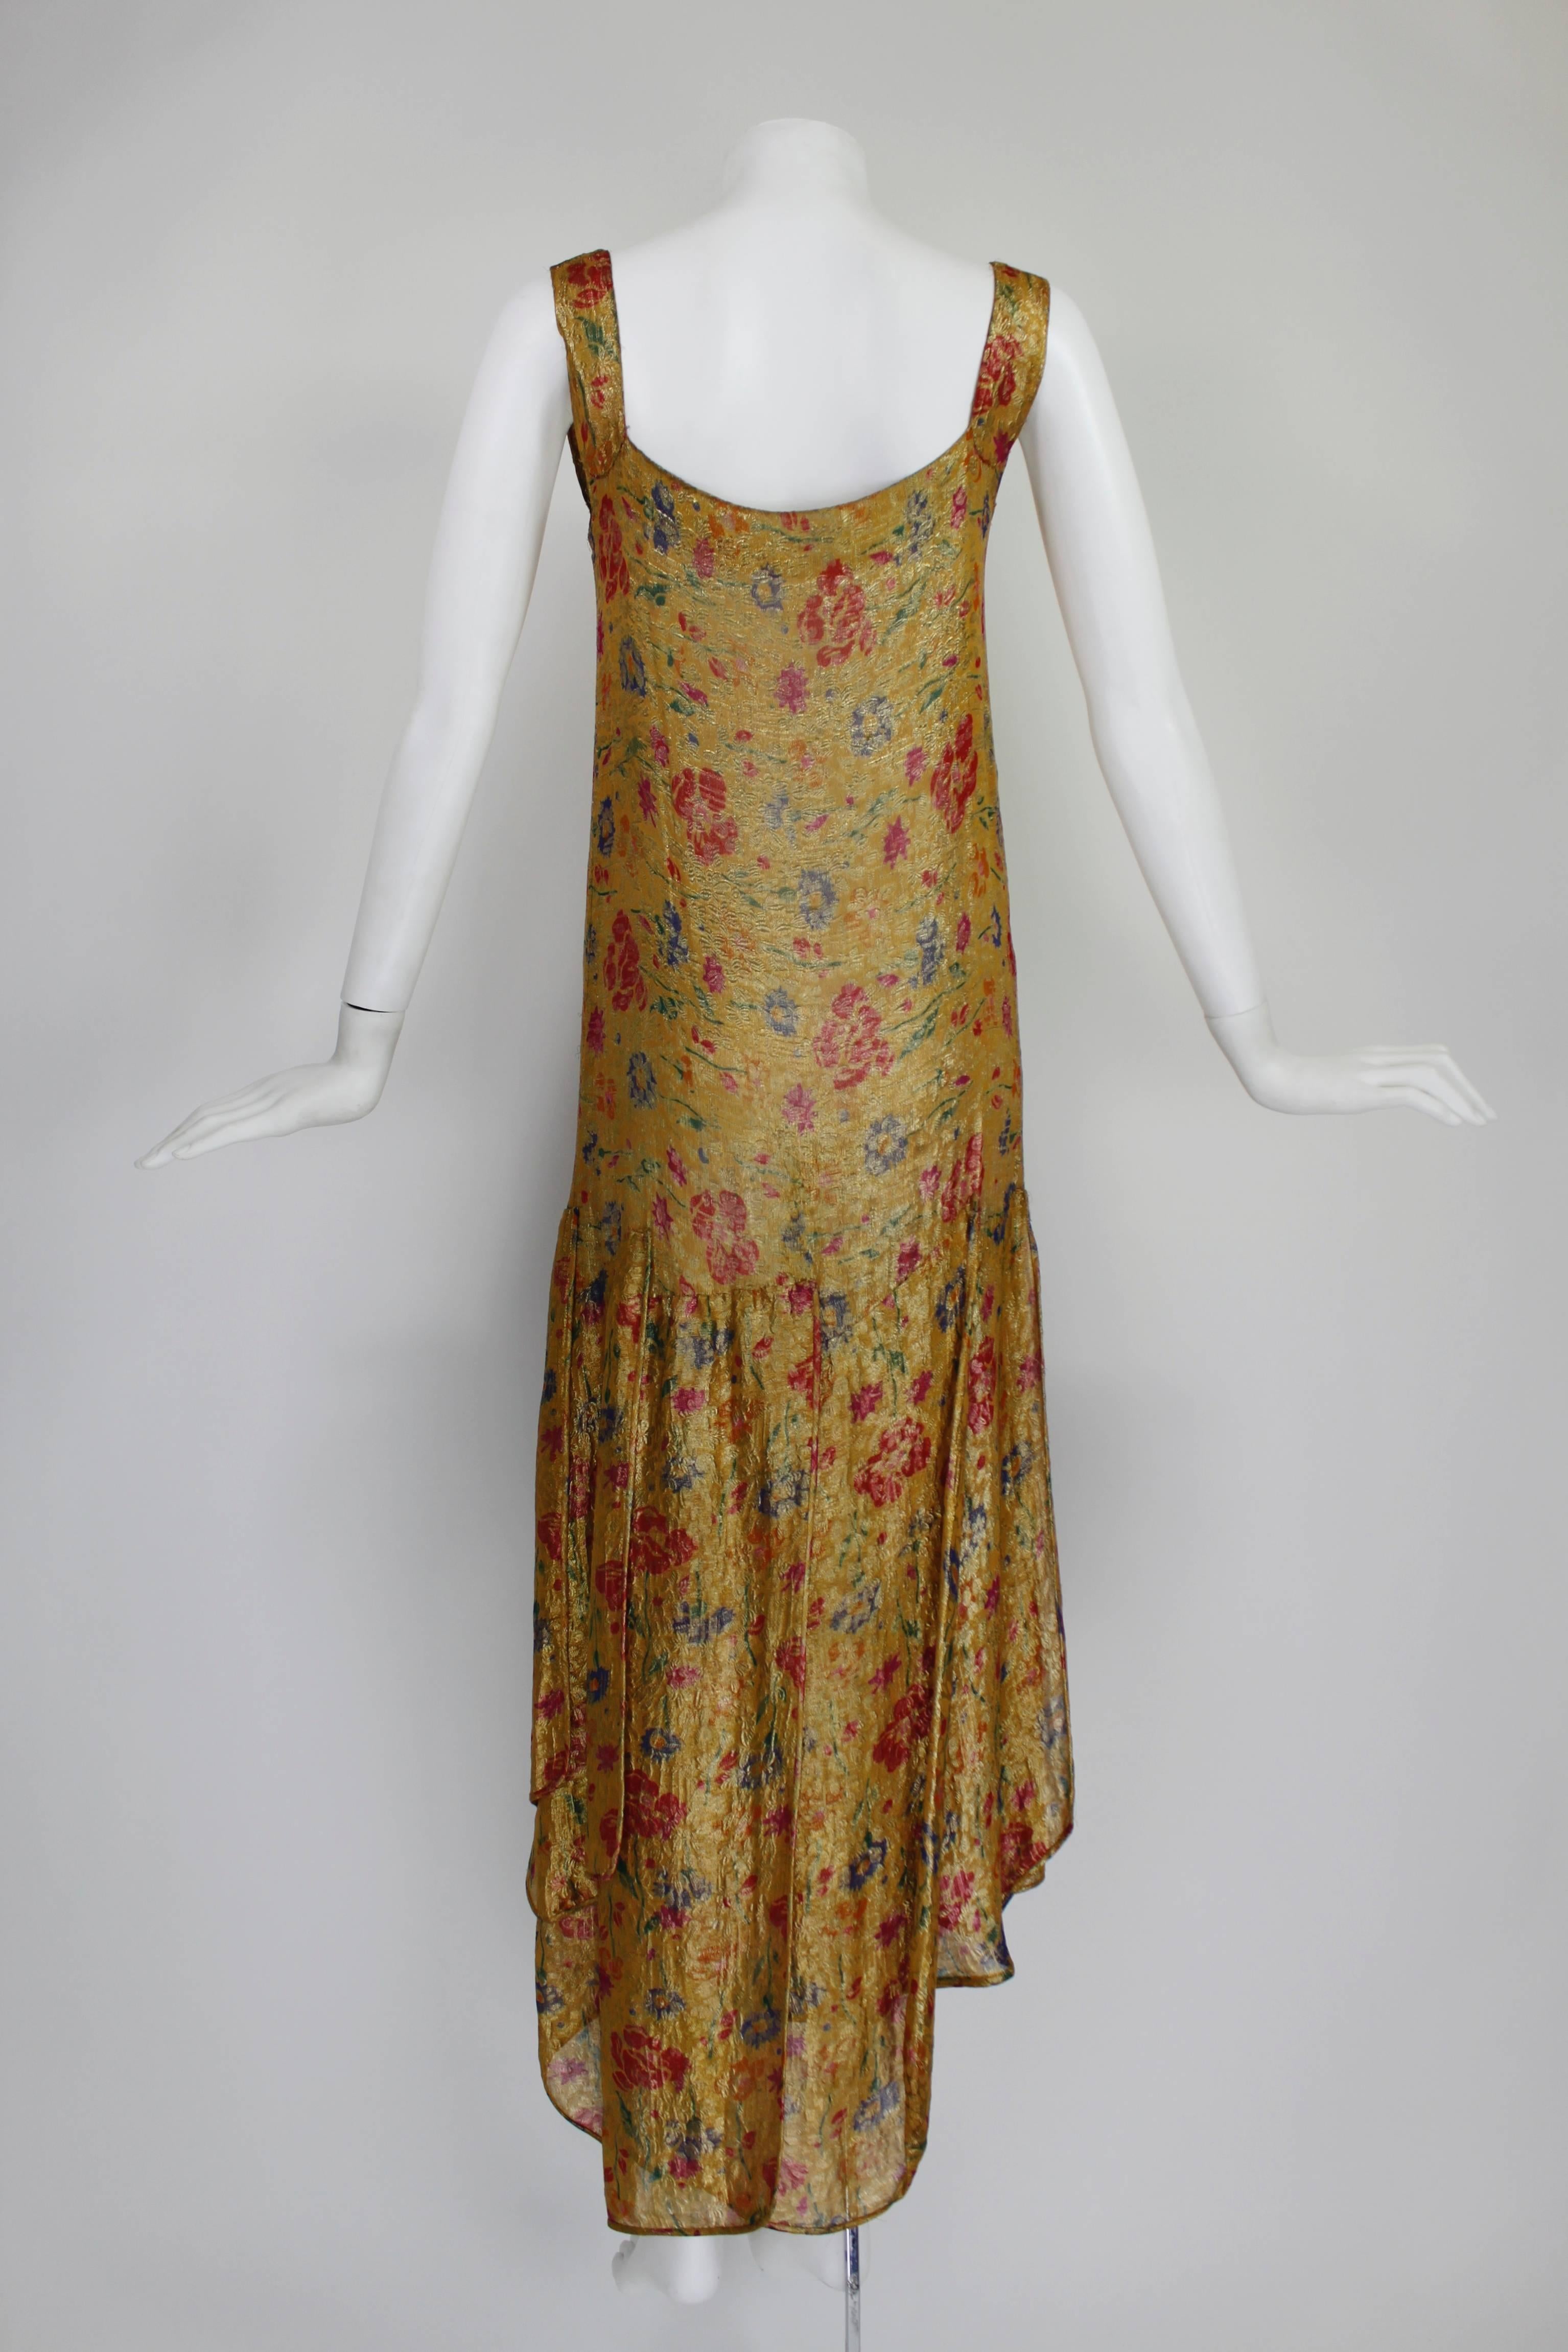 1920s Tiered Marigold Floral French Lamé Cocktail Dress In Excellent Condition For Sale In Los Angeles, CA